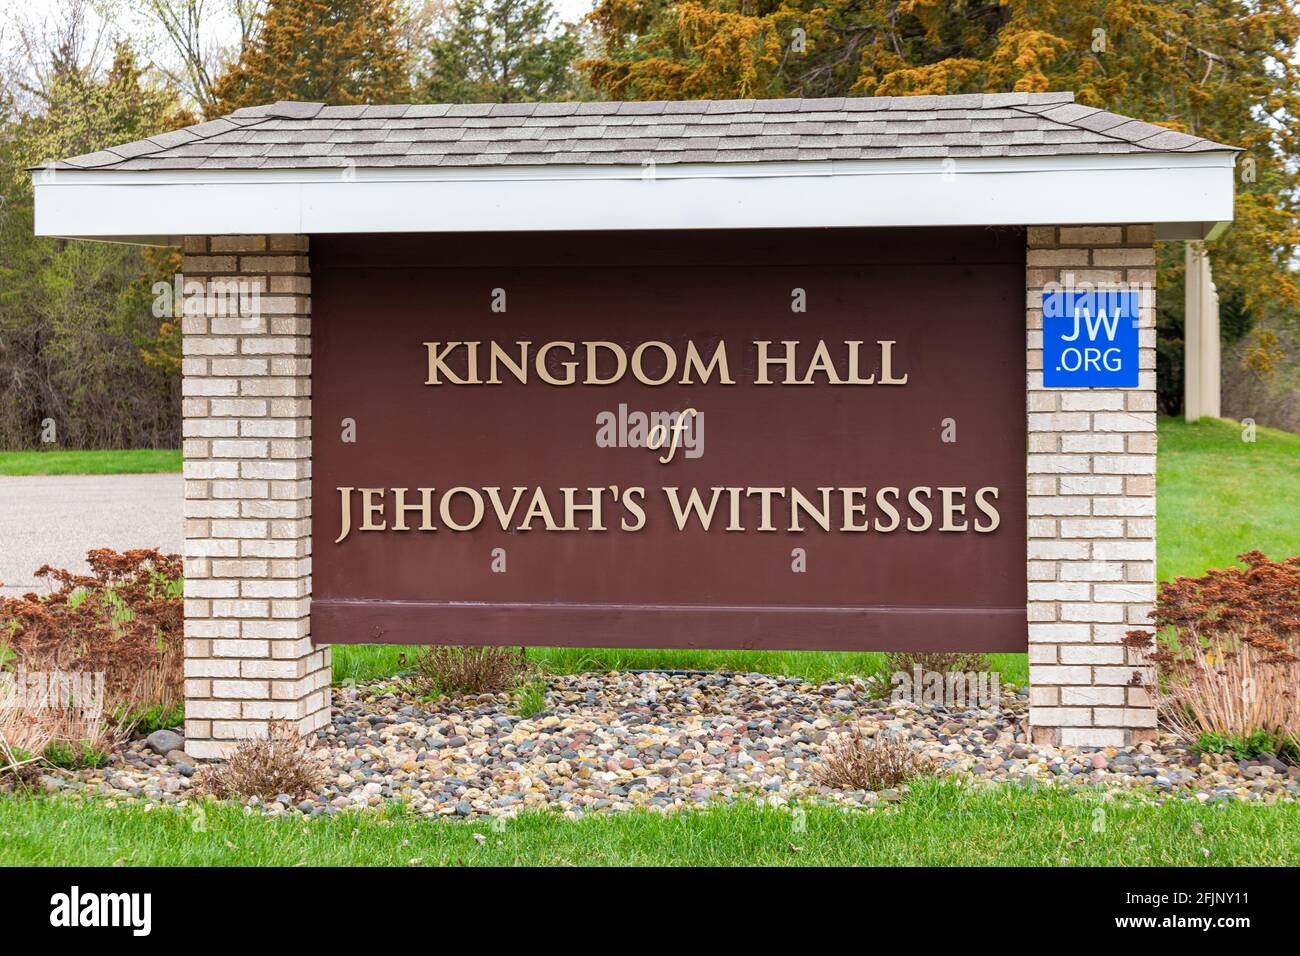 HUDSON, WI,USA - APRIL 24, 2021 - Kingdom Hall of Jehovah's Witnesses exterior sign and trademark logo. Stock Photo